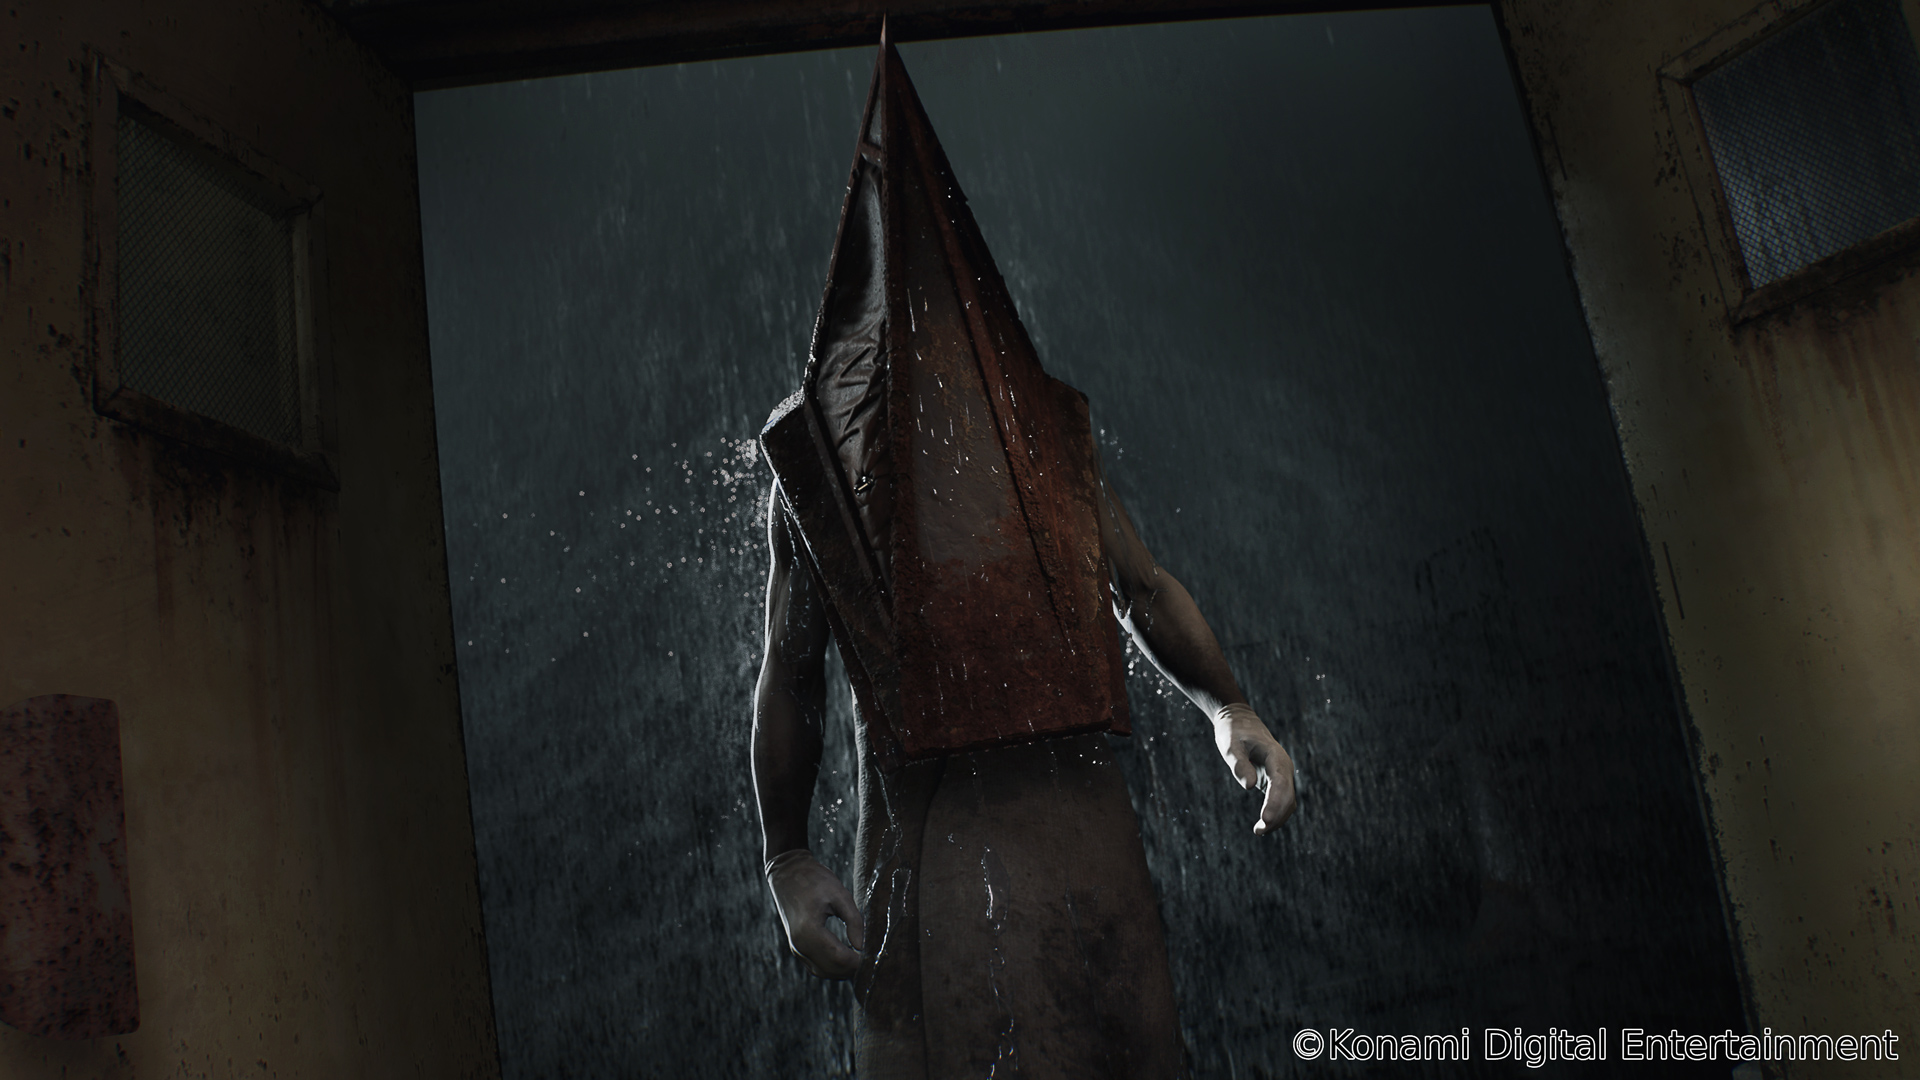 Silent Hill 2 Remake, Townfall, and Ascension teasers are coming “soon”, according to this new leak